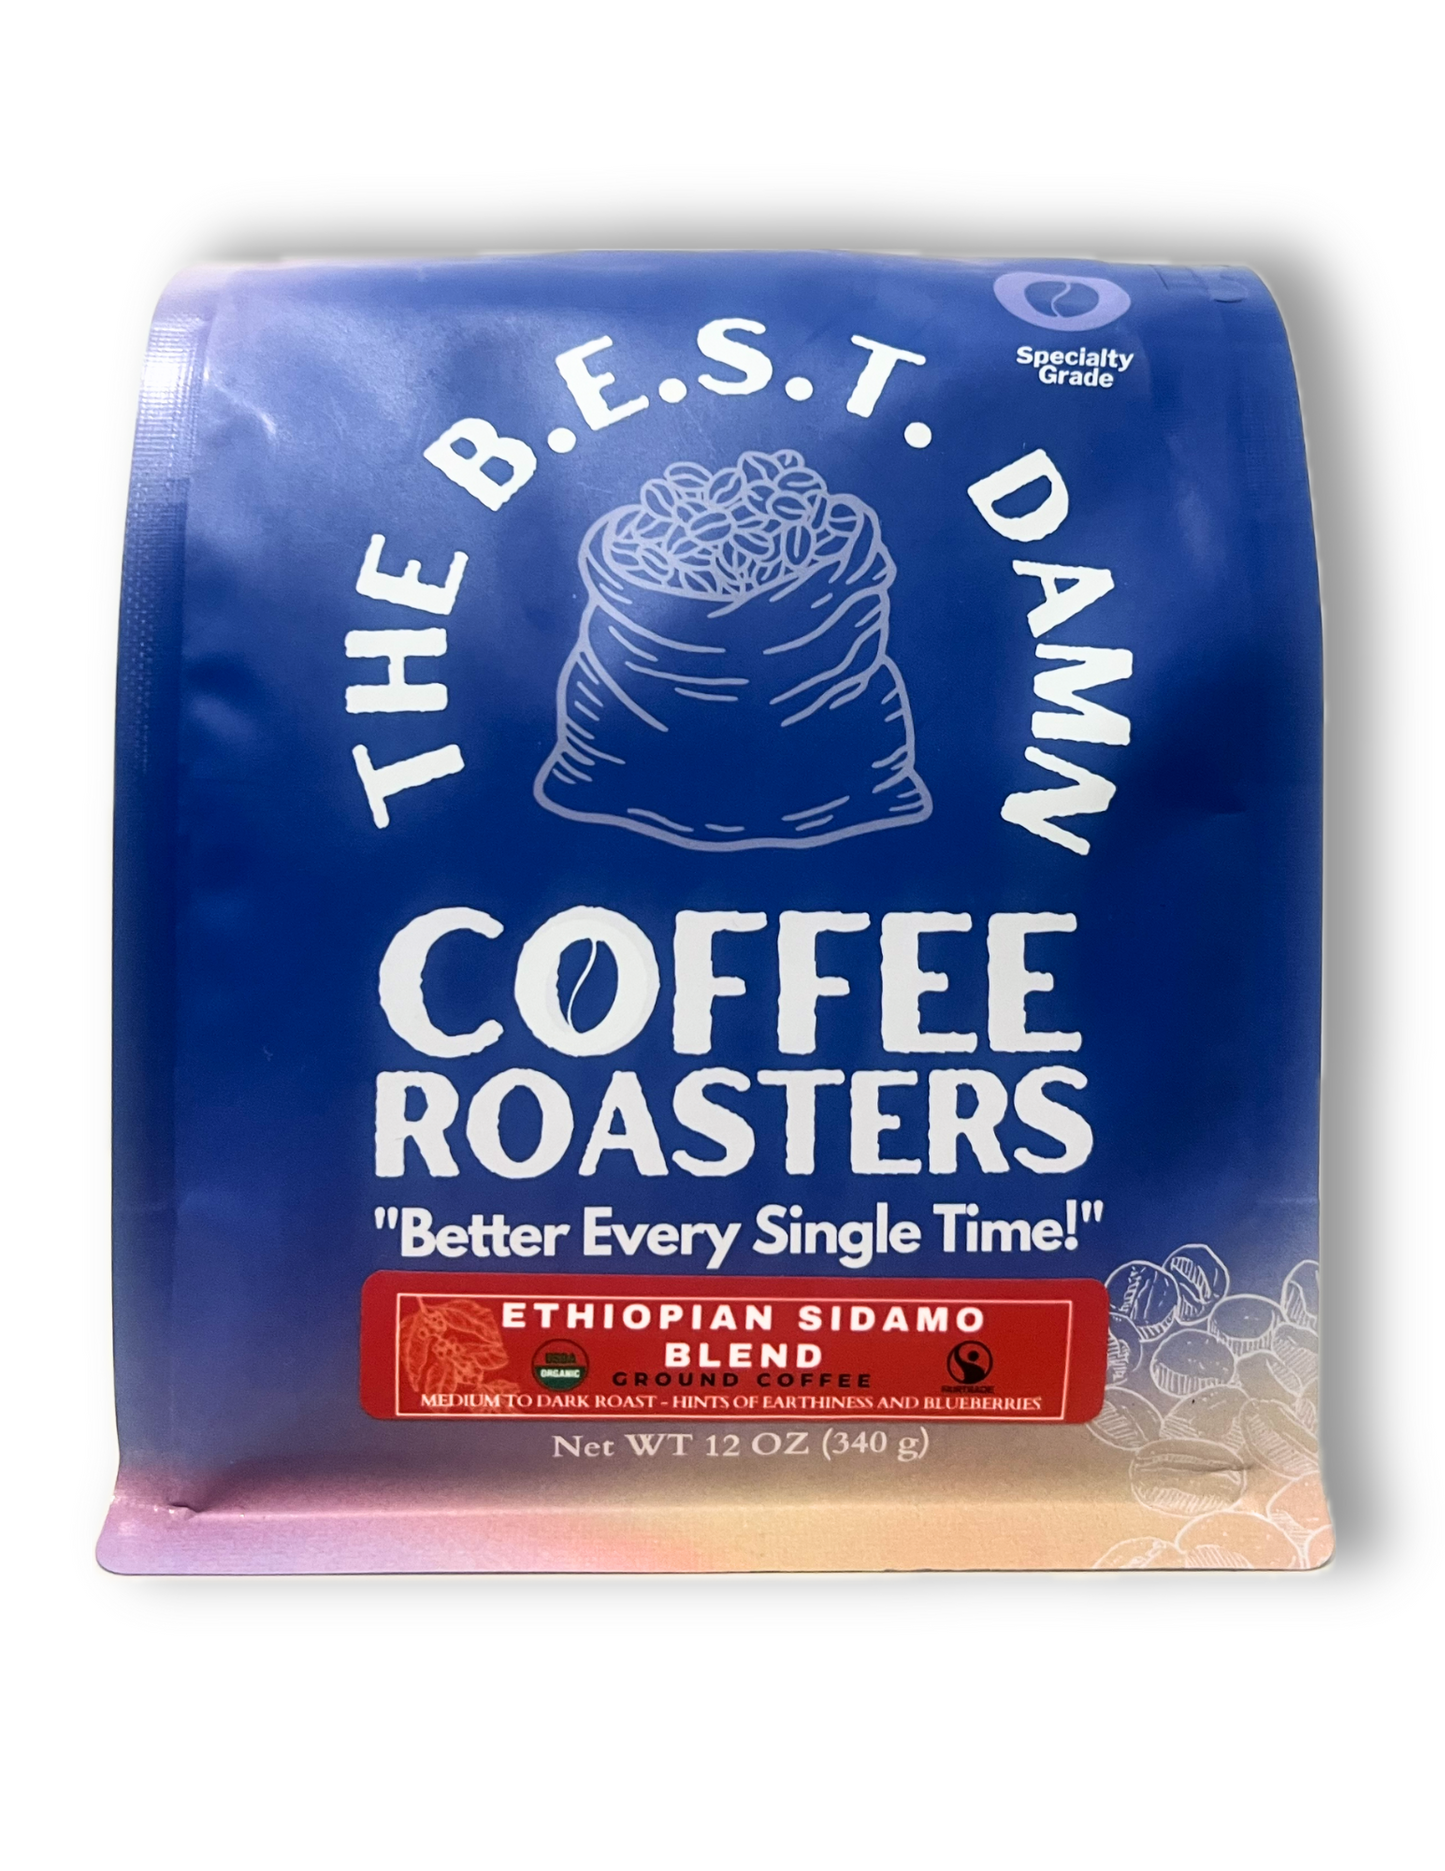 a bag of coffee roasters coffee beans